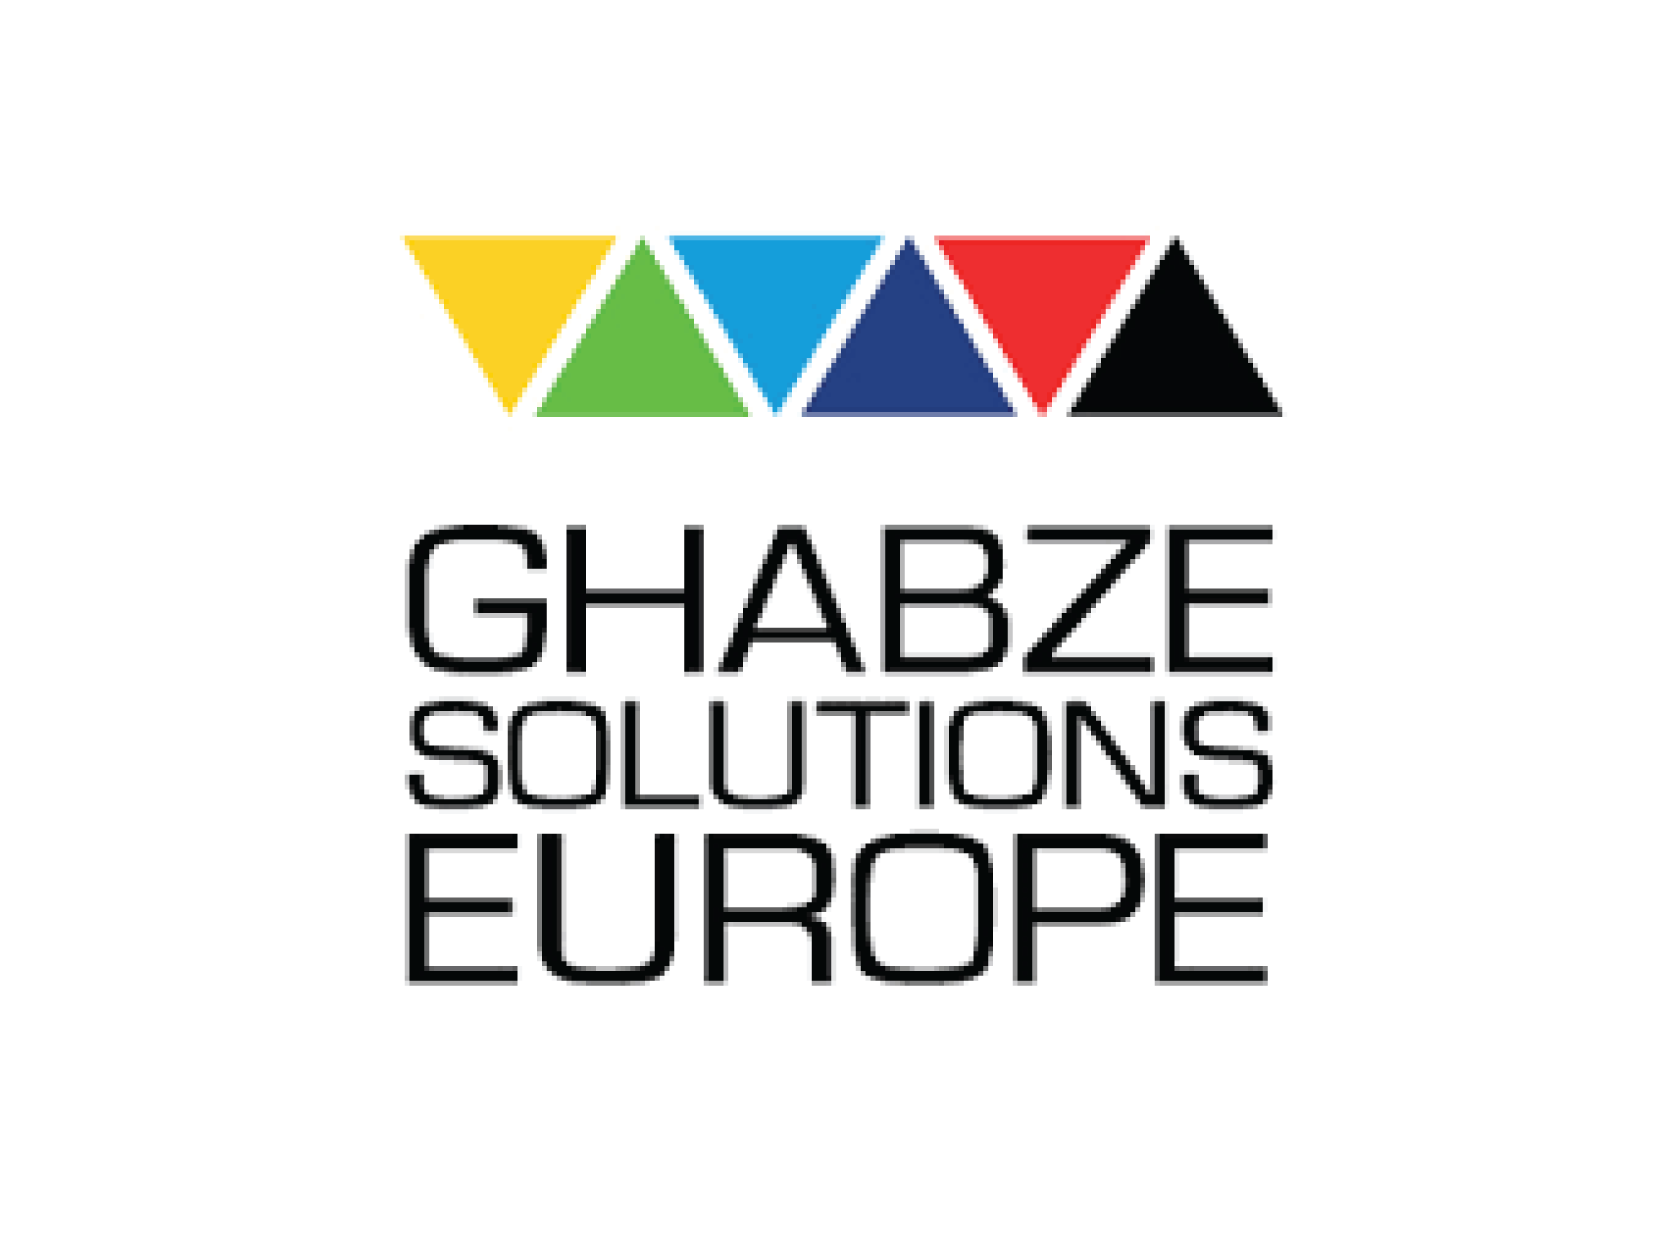 Ghabze Solutions Europe LOGO